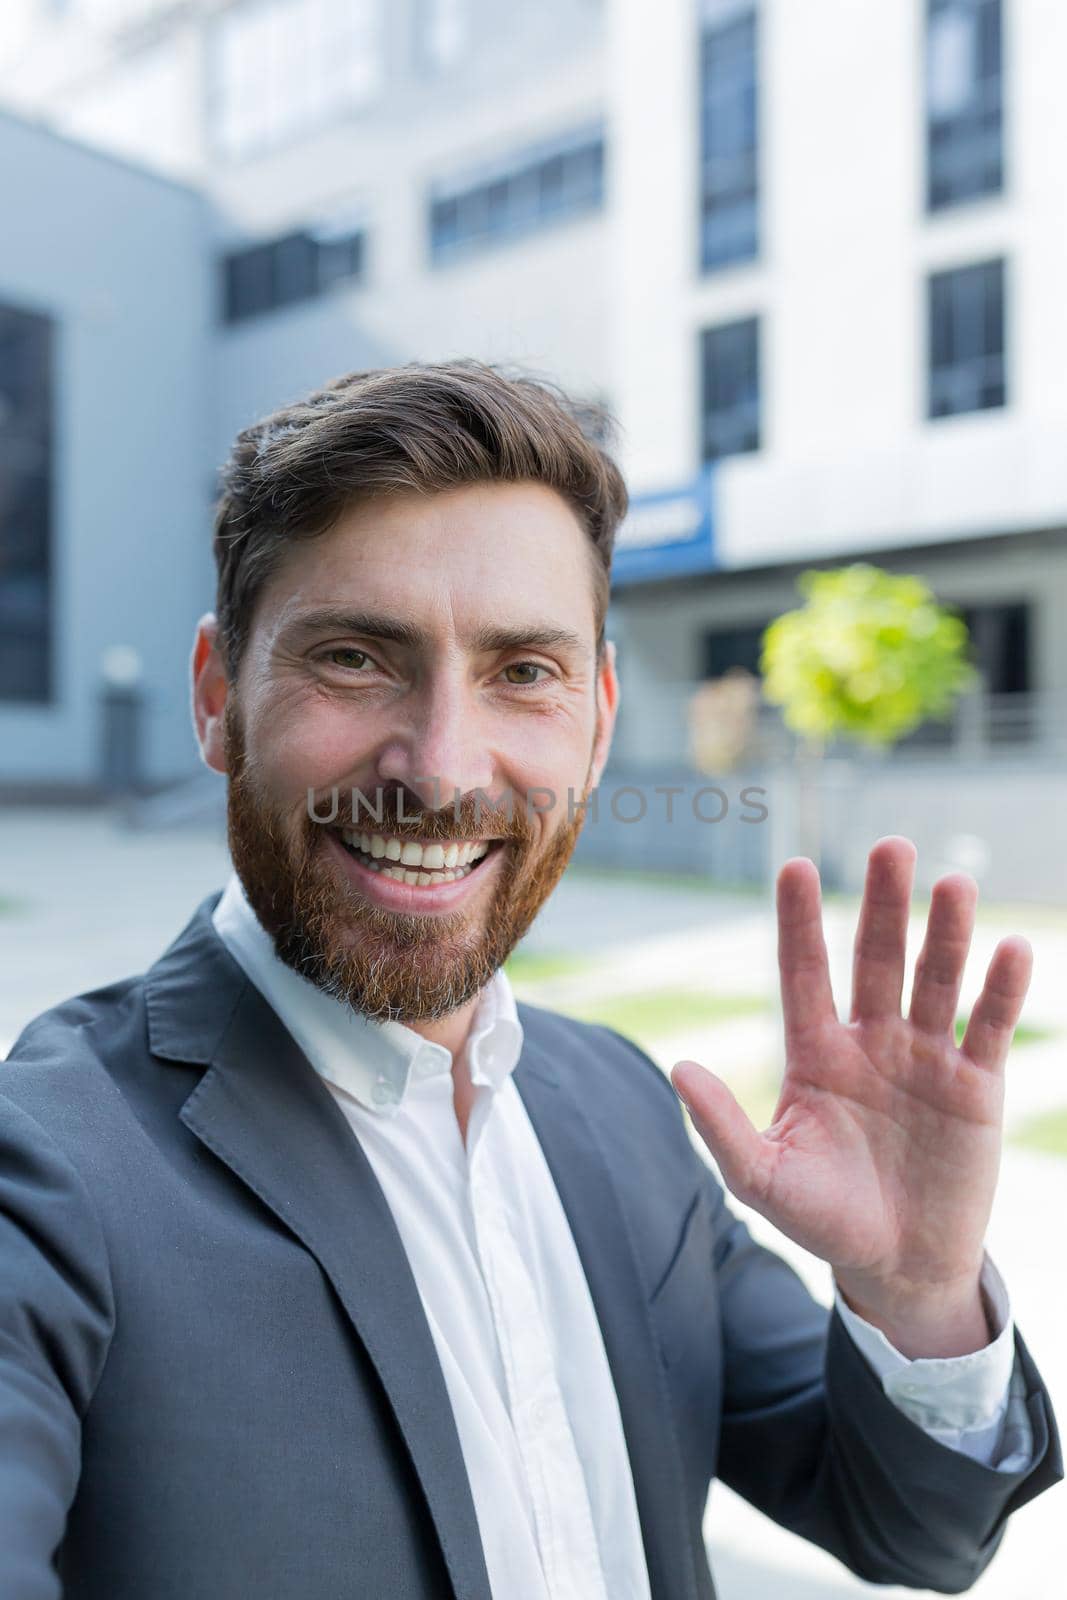 vertical view smartphone camera Caucasian bearded businessman speaks on phone using a front camera on a video call. employee business man talking on webcam. Conversation of an office worker in suit